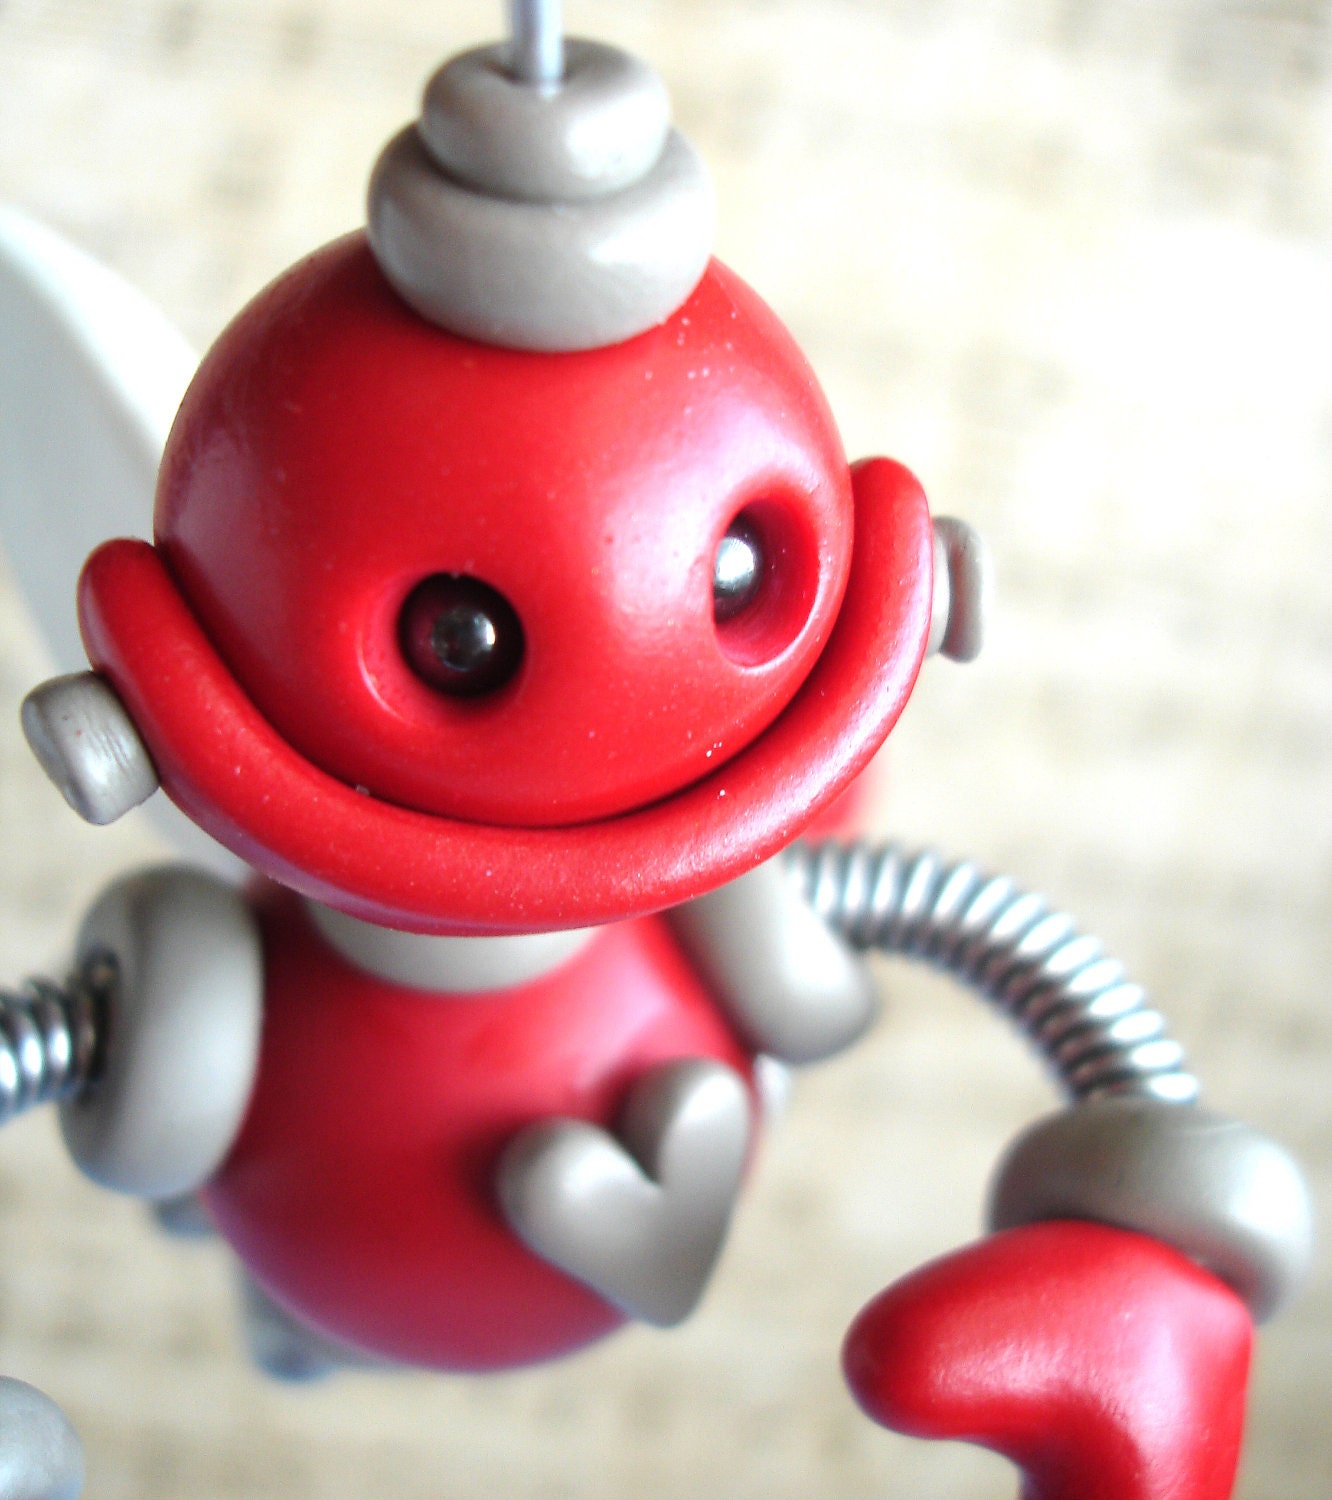 Red Rigby Angel Robot Christmas Ornament - Polymer Clay, Wire